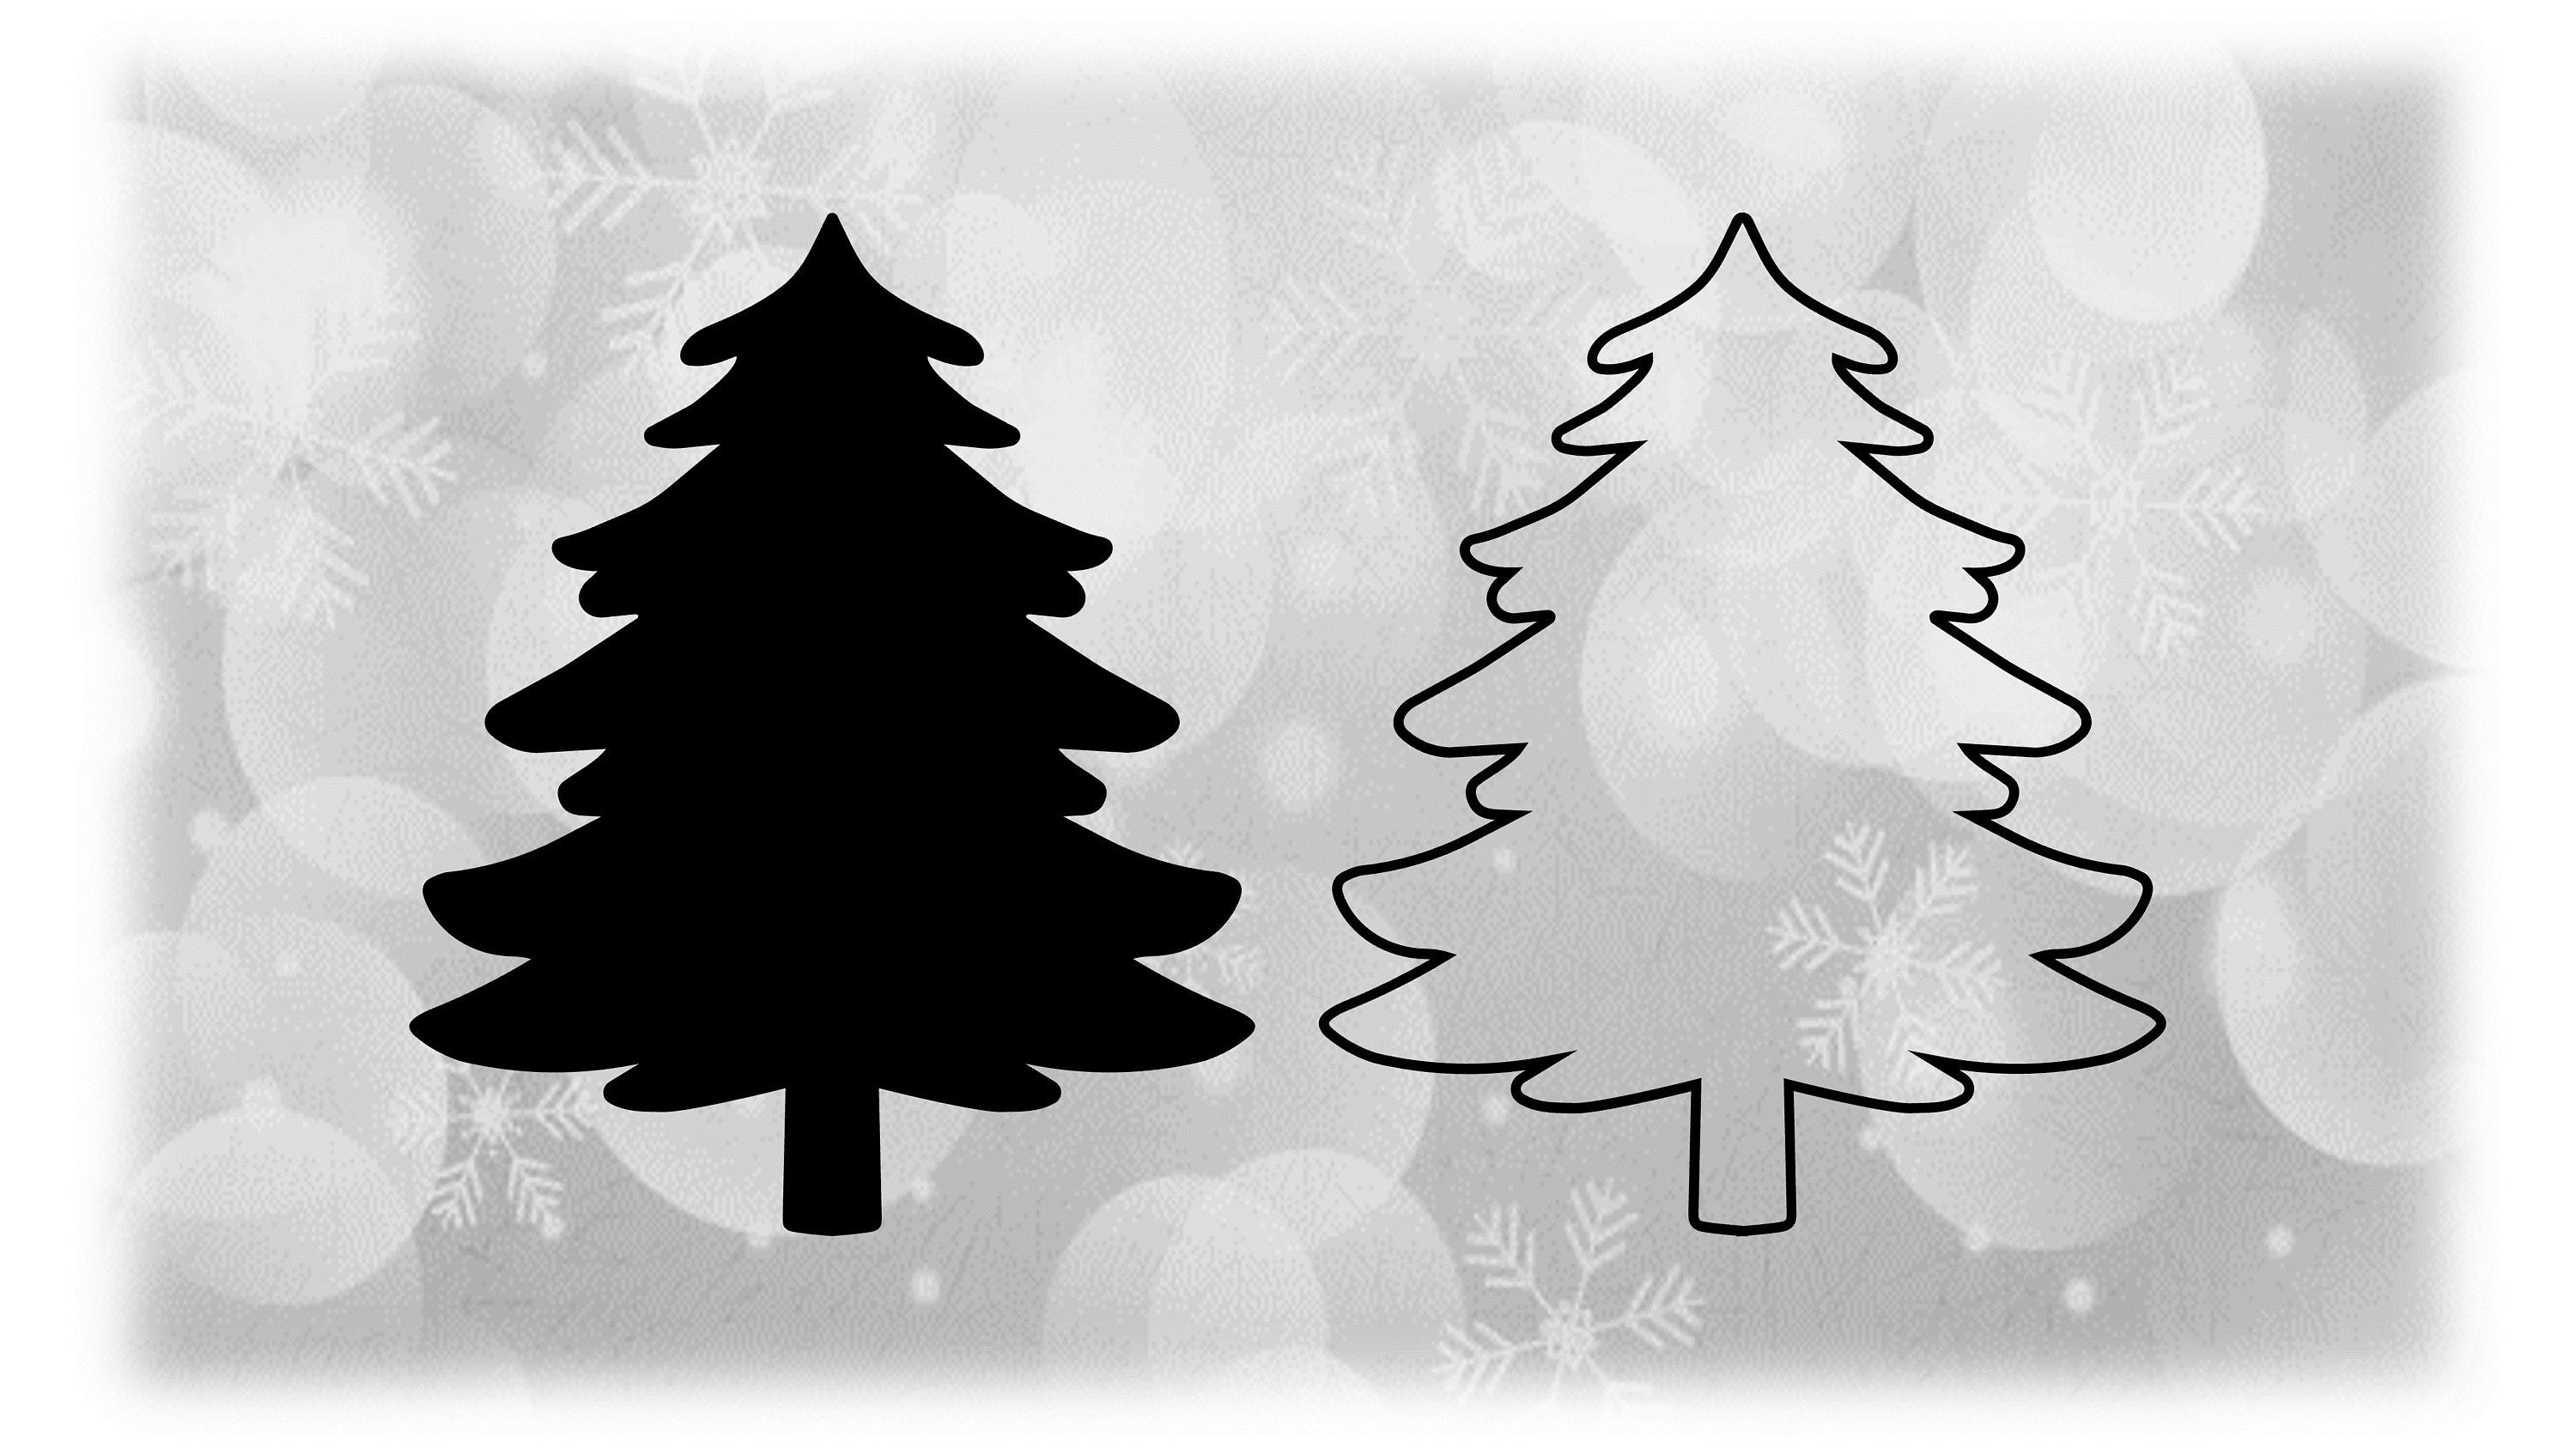 Holiday Clipart: Black Solid and Outline Wispy Evergreen / Pine Tree for Winter, Christmas, Yule Celebration - Digital Download SVG & PNG